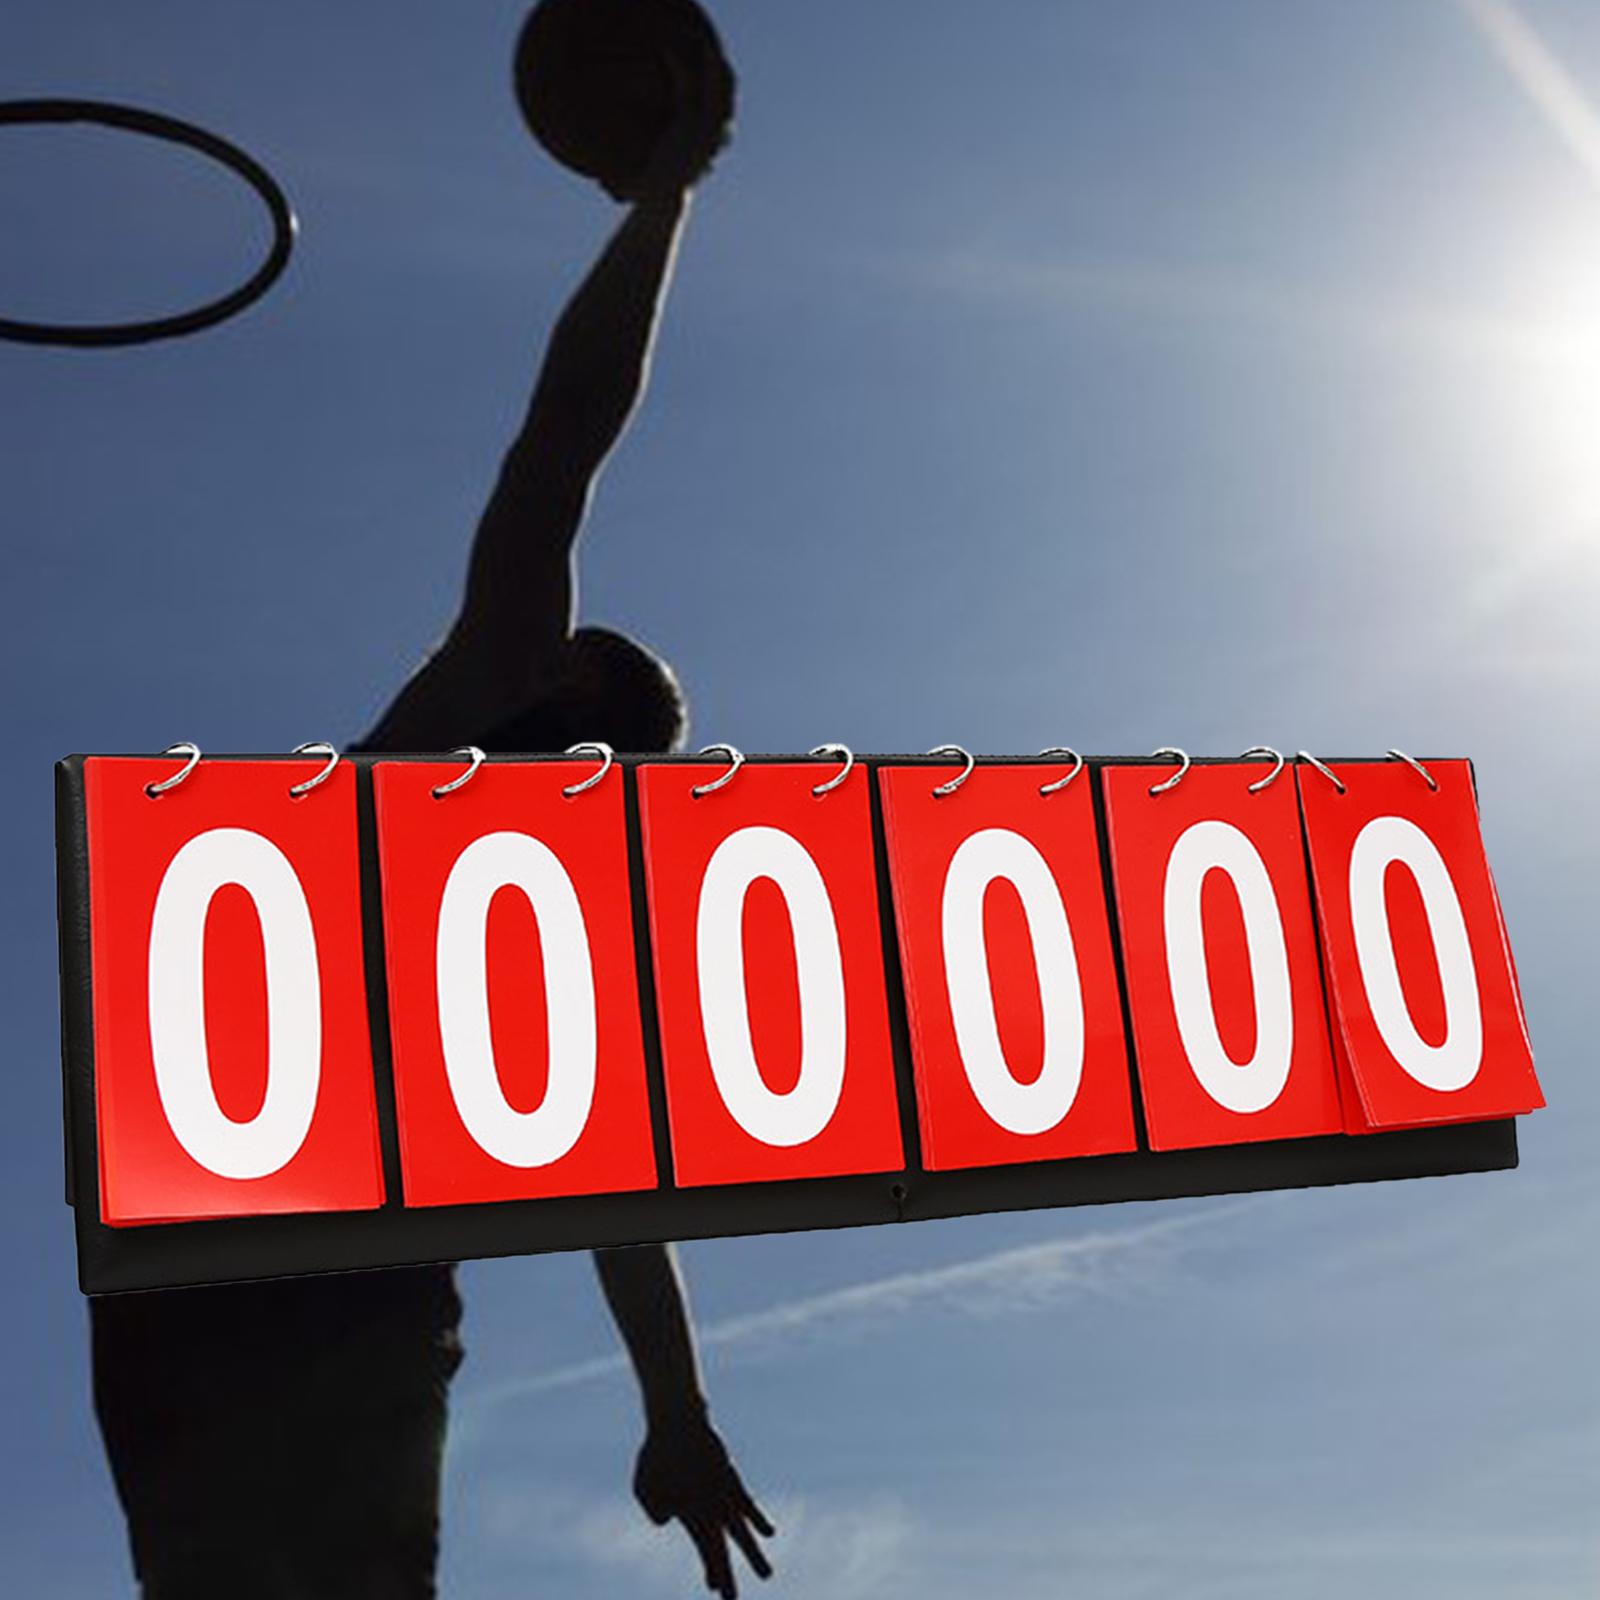 6 digits Table Top Scoreboard Portable Scoring for Tennis Ball Indoor Games Red